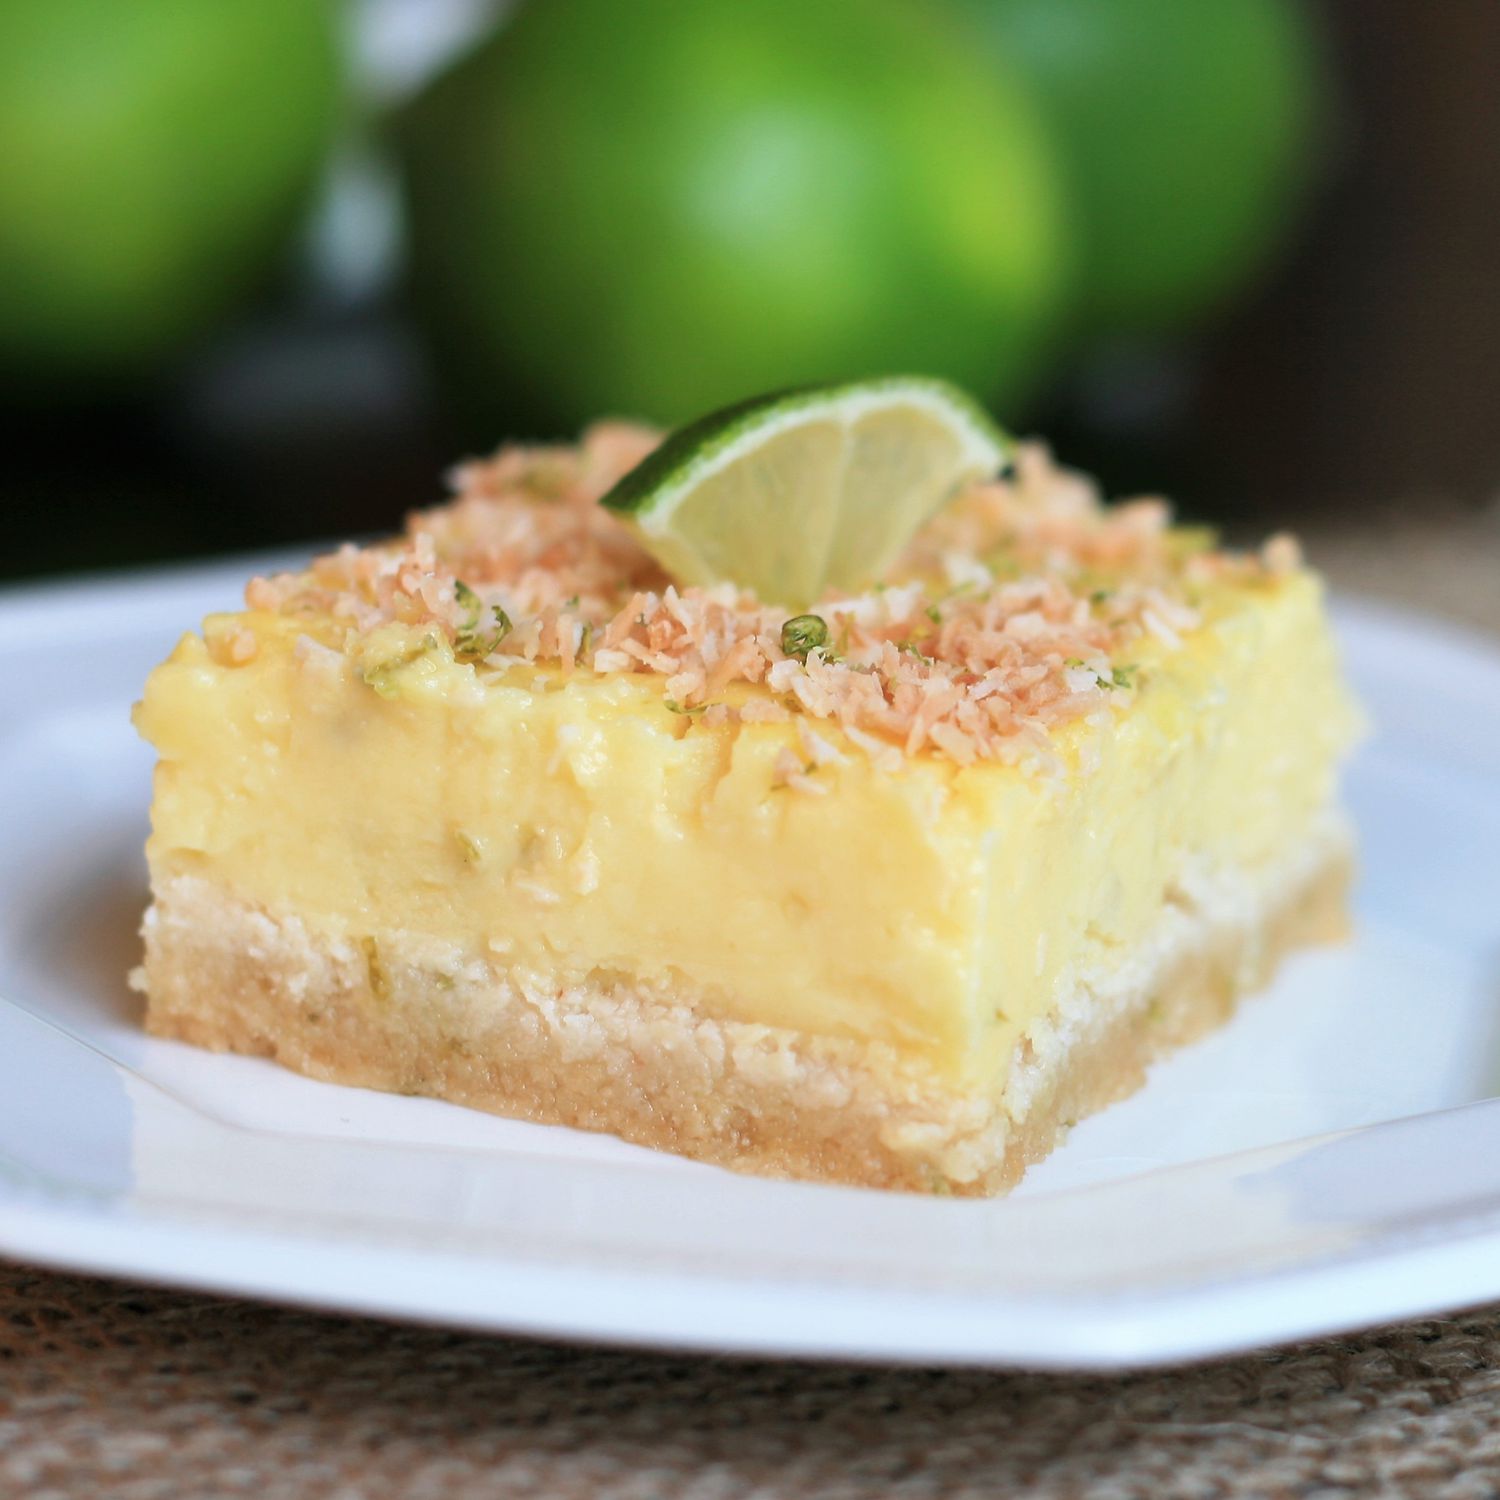 Close up view of a Low-Carb Coconut Lime Bar, garnished with toasted coconut, lime zest, and a slice of lime, on a white plate